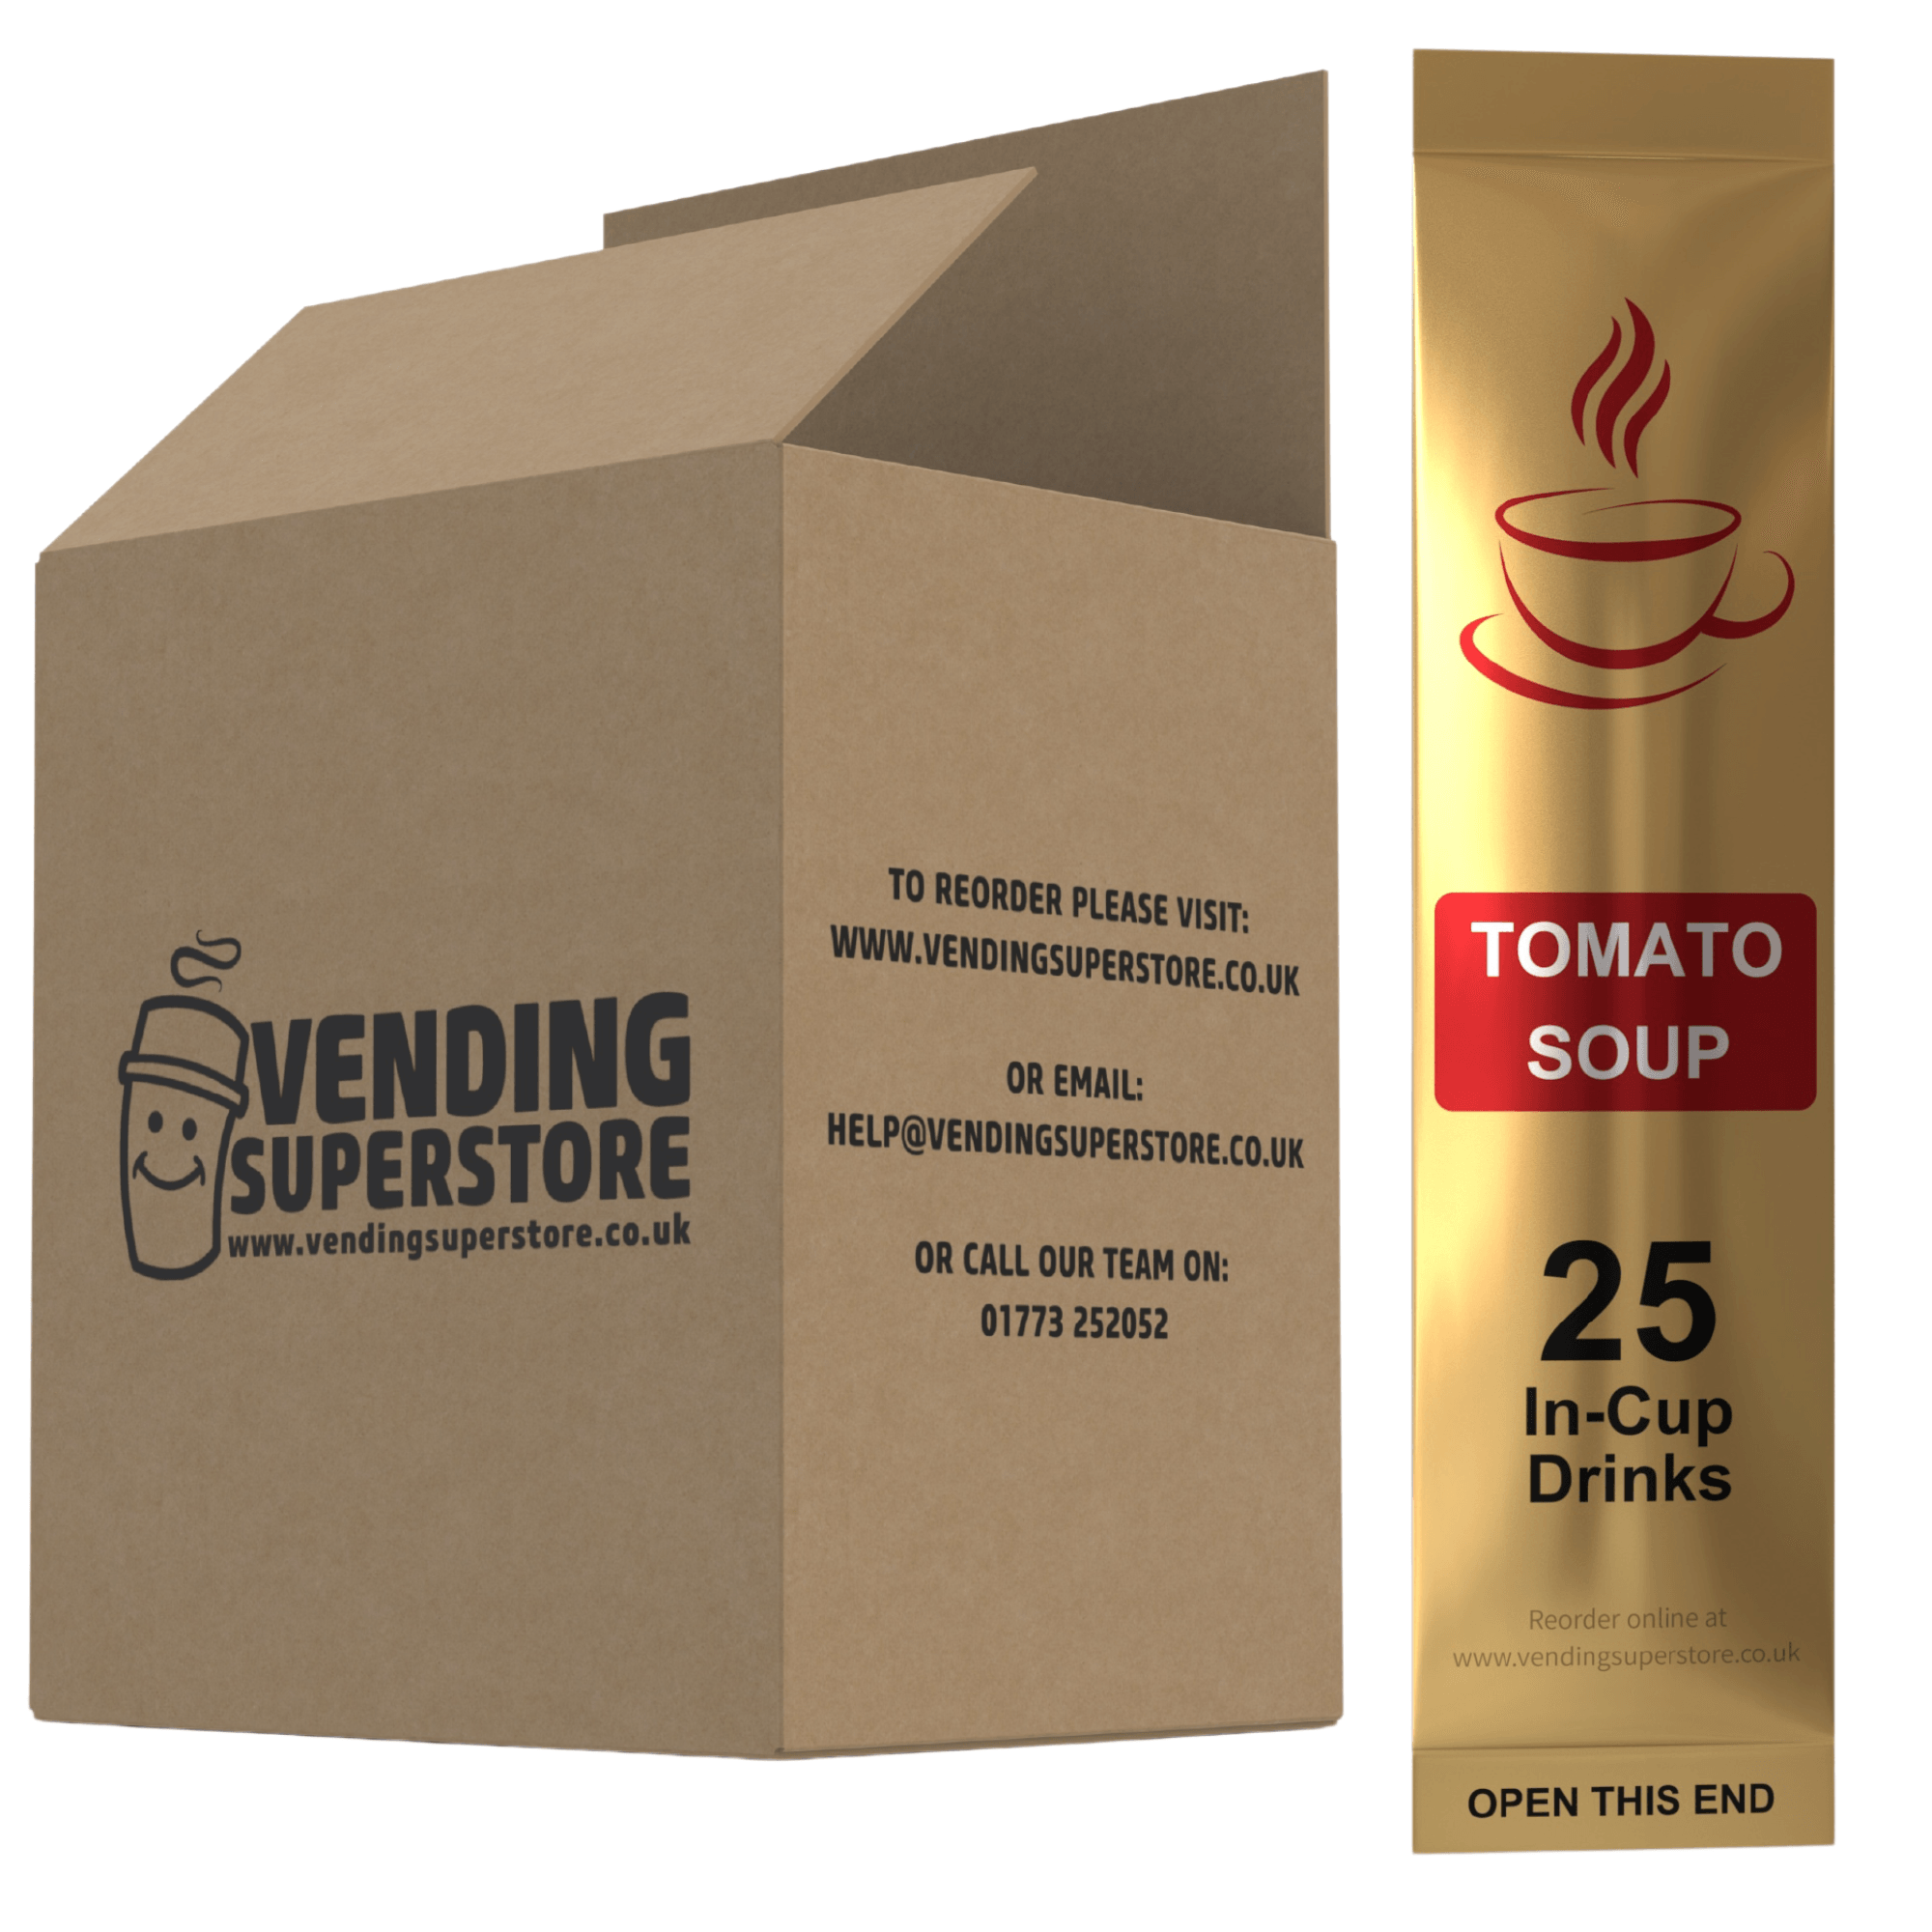 Incup Vending Drinks - Tomato Soup - Half Case 150 Cups - Vending Superstore